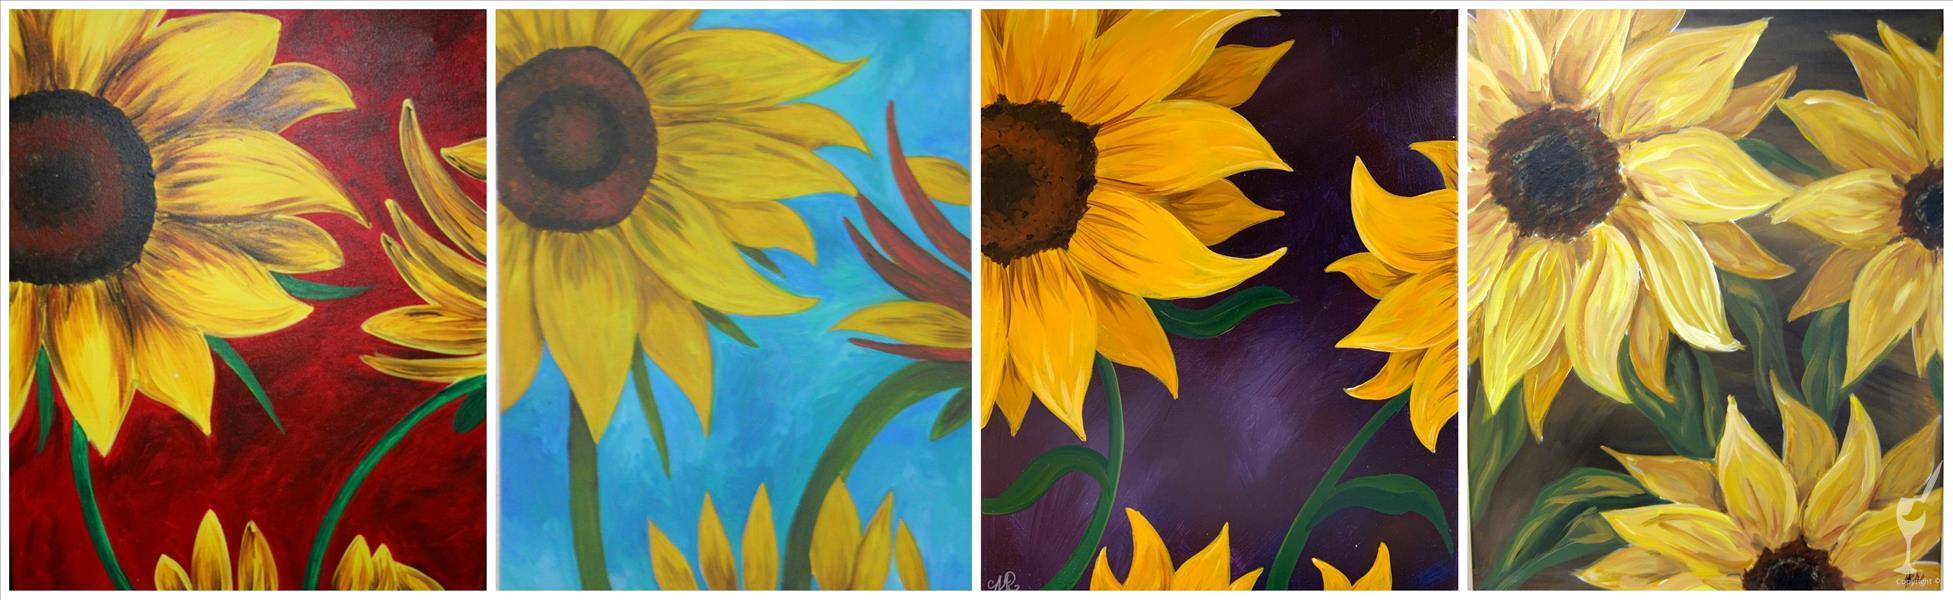 Sunflowers on your color!